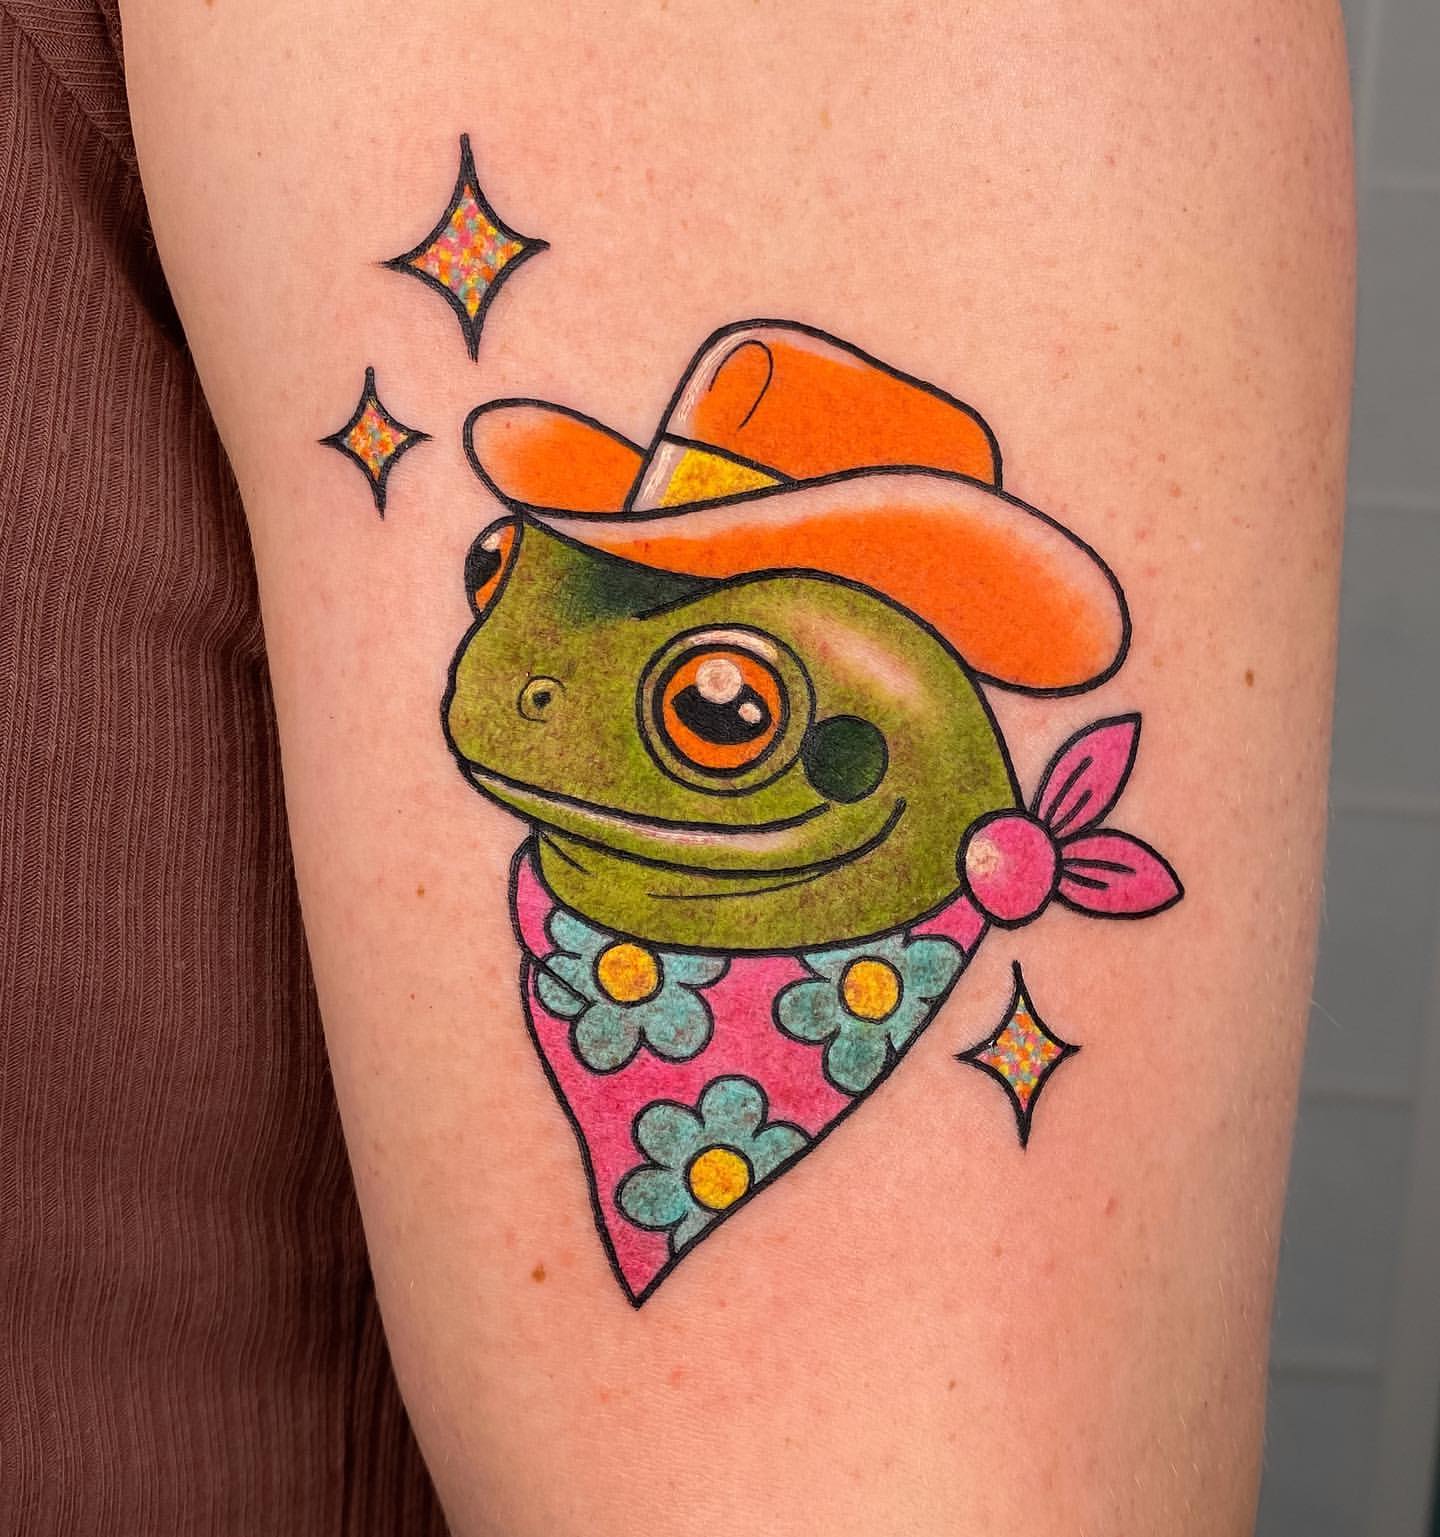 8 Funky  Solid Traditional Frog Tattoos  Tattoodo  Frog tattoos Nature  tattoo sleeve Traditional tattoo